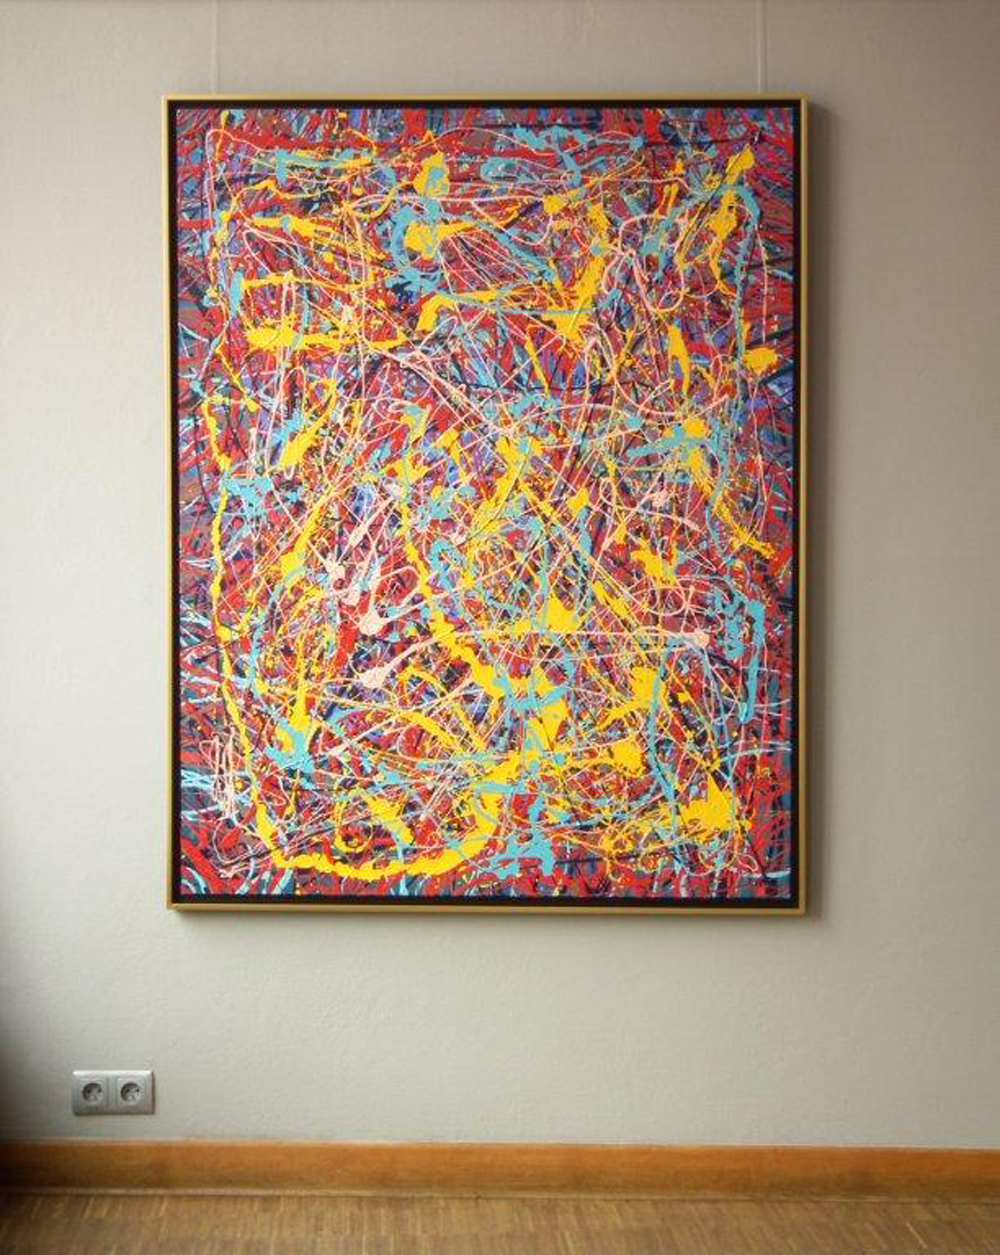 Edward Dwurnik - Abstract painting No 72 (Oil on Canvas | Size: 119 x 151 cm | Price: 29000 PLN)